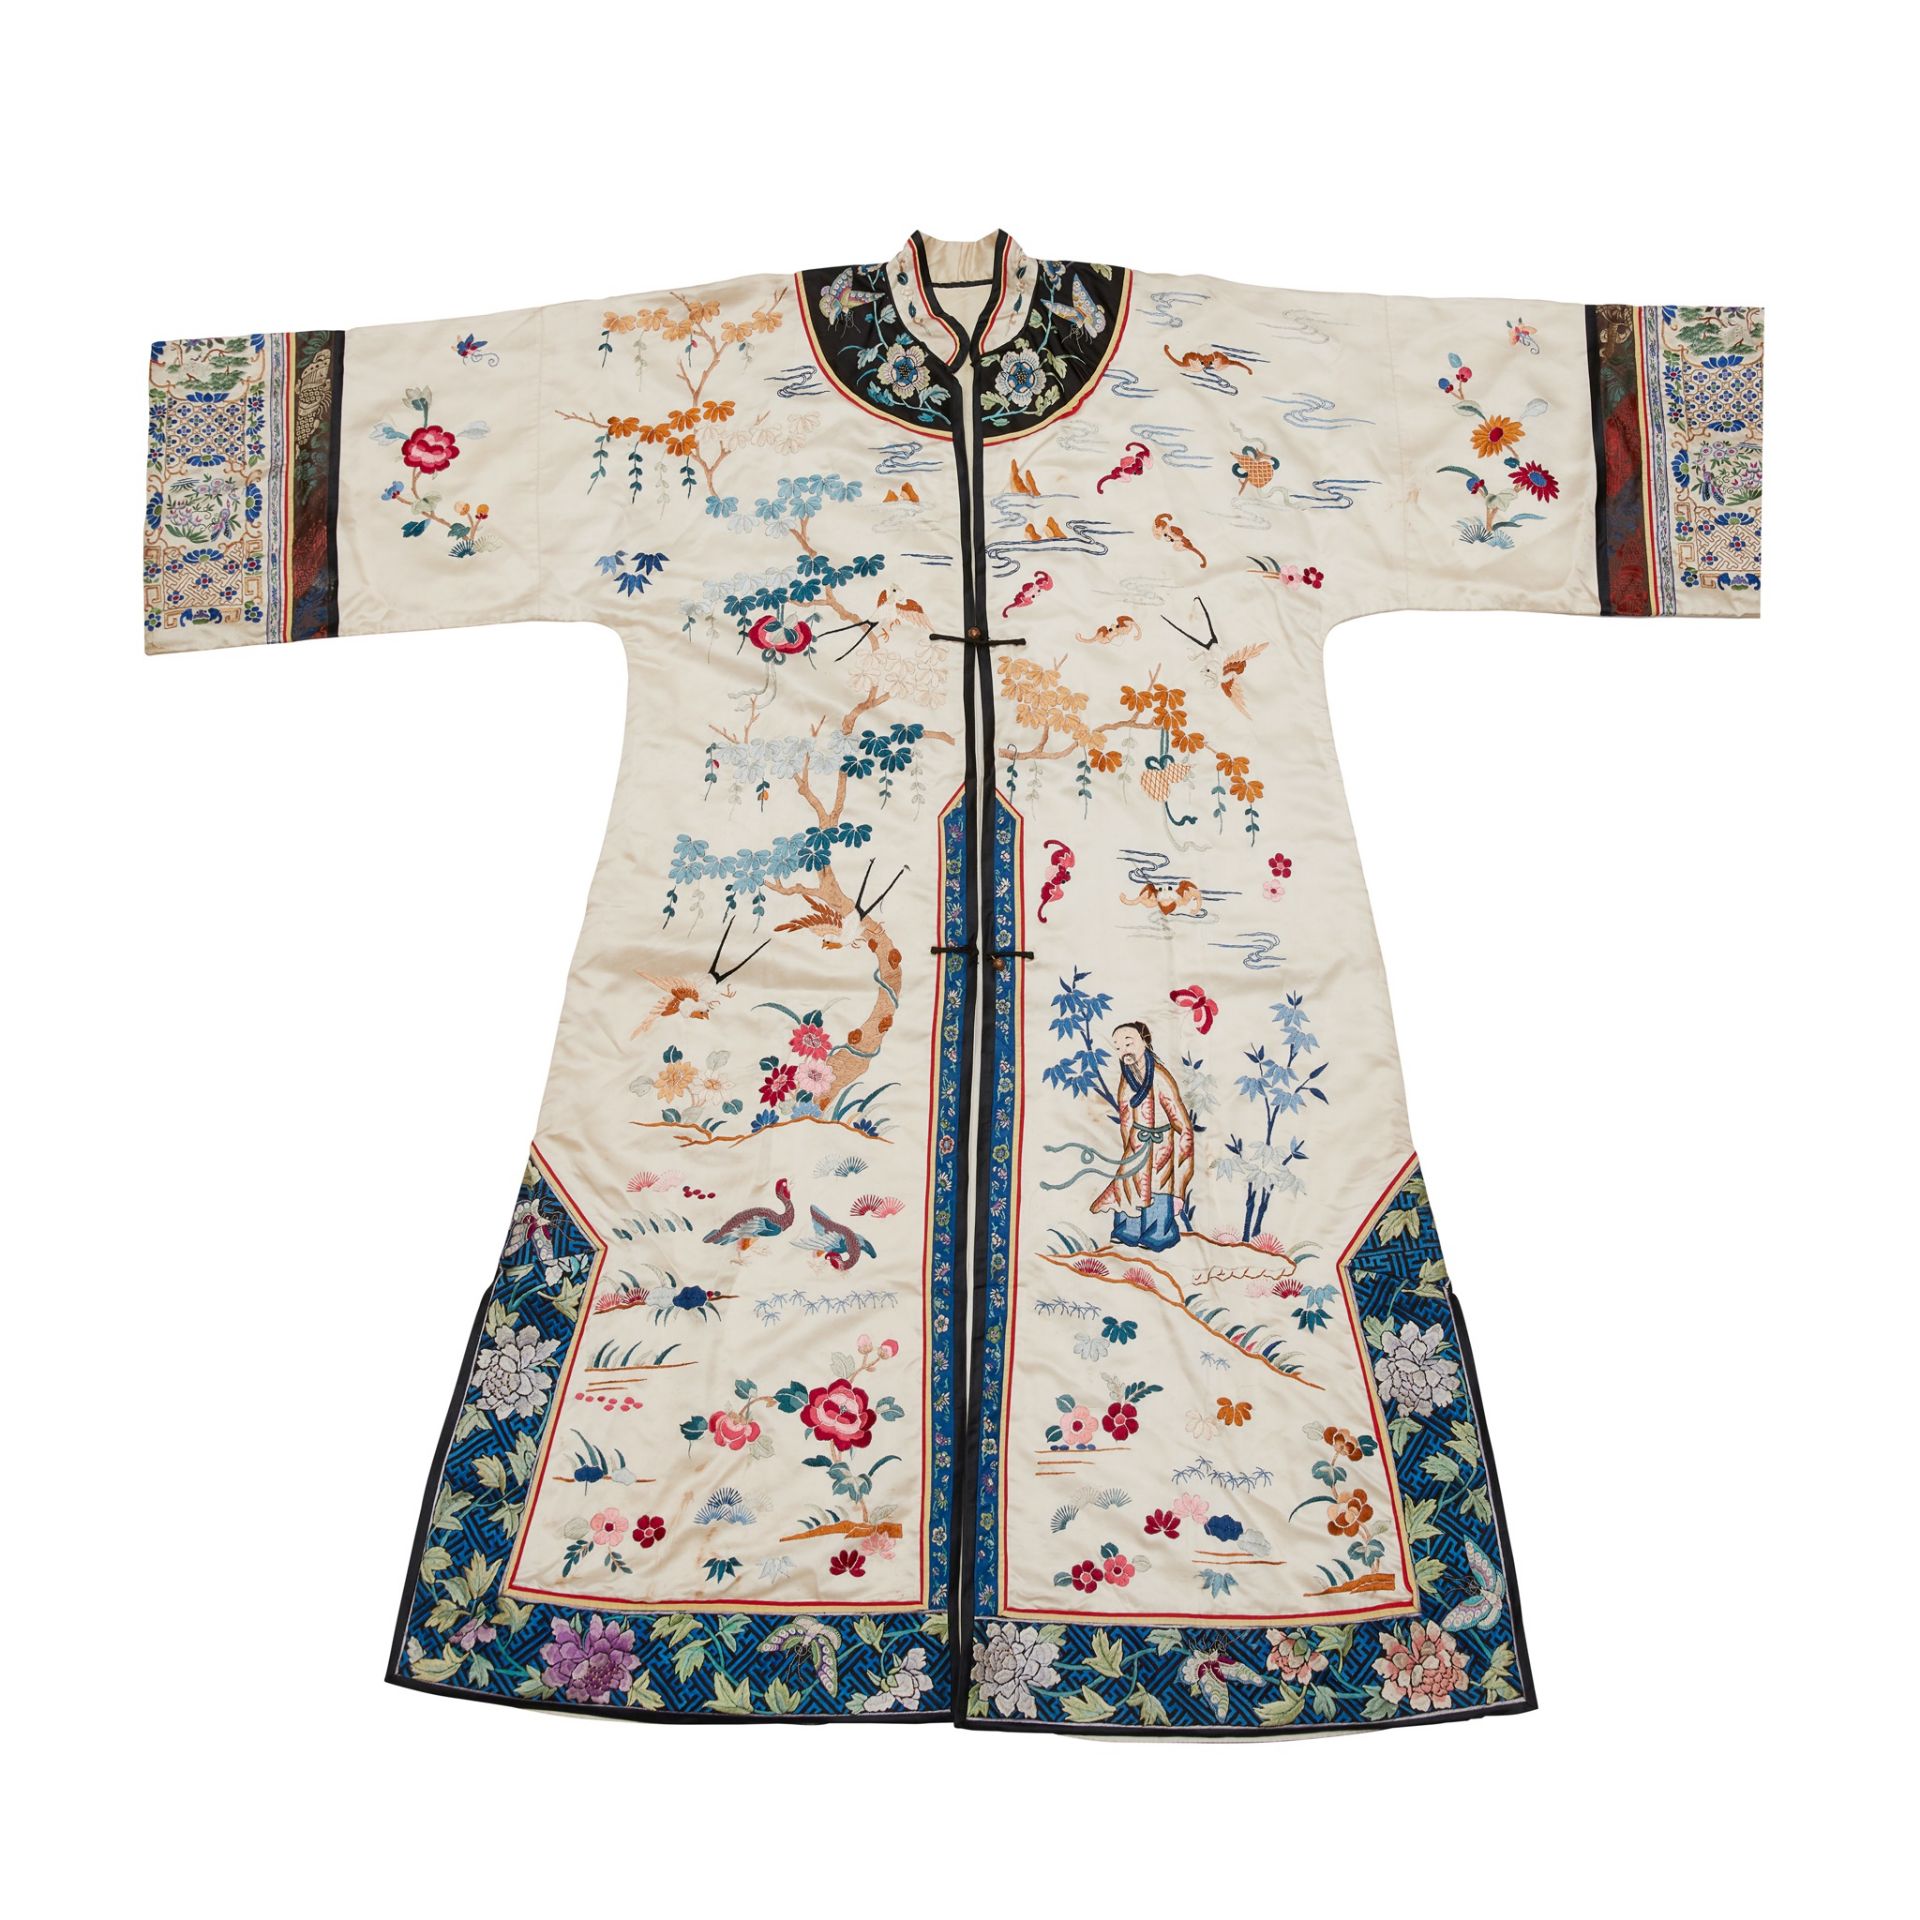 IVORY GROUND SILK EMBROIDERED LADY'S ROBE LATE QING DYNASTY-REPUBLIC PERIOD, 19TH-20TH CENTURY - Image 3 of 3